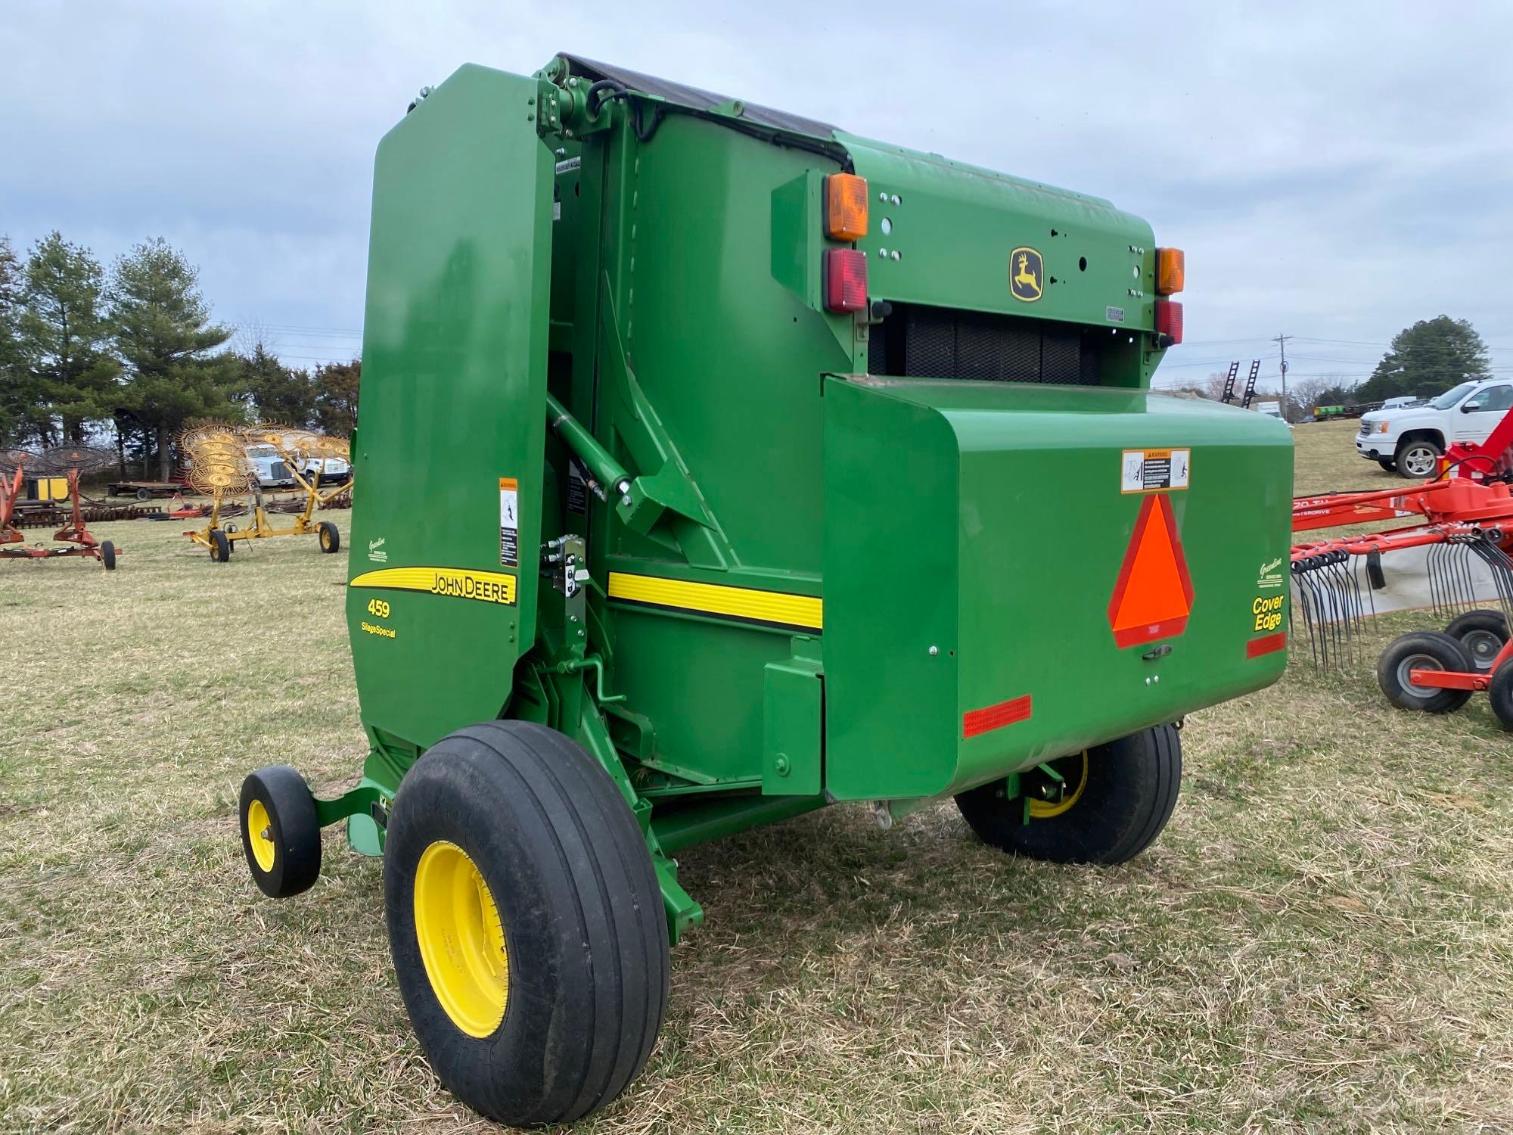 Image for 2017 John Deere 459 Round Baler Silage Special w/Net Wrap & Monitor Approx. 5600 bales Ready to Work